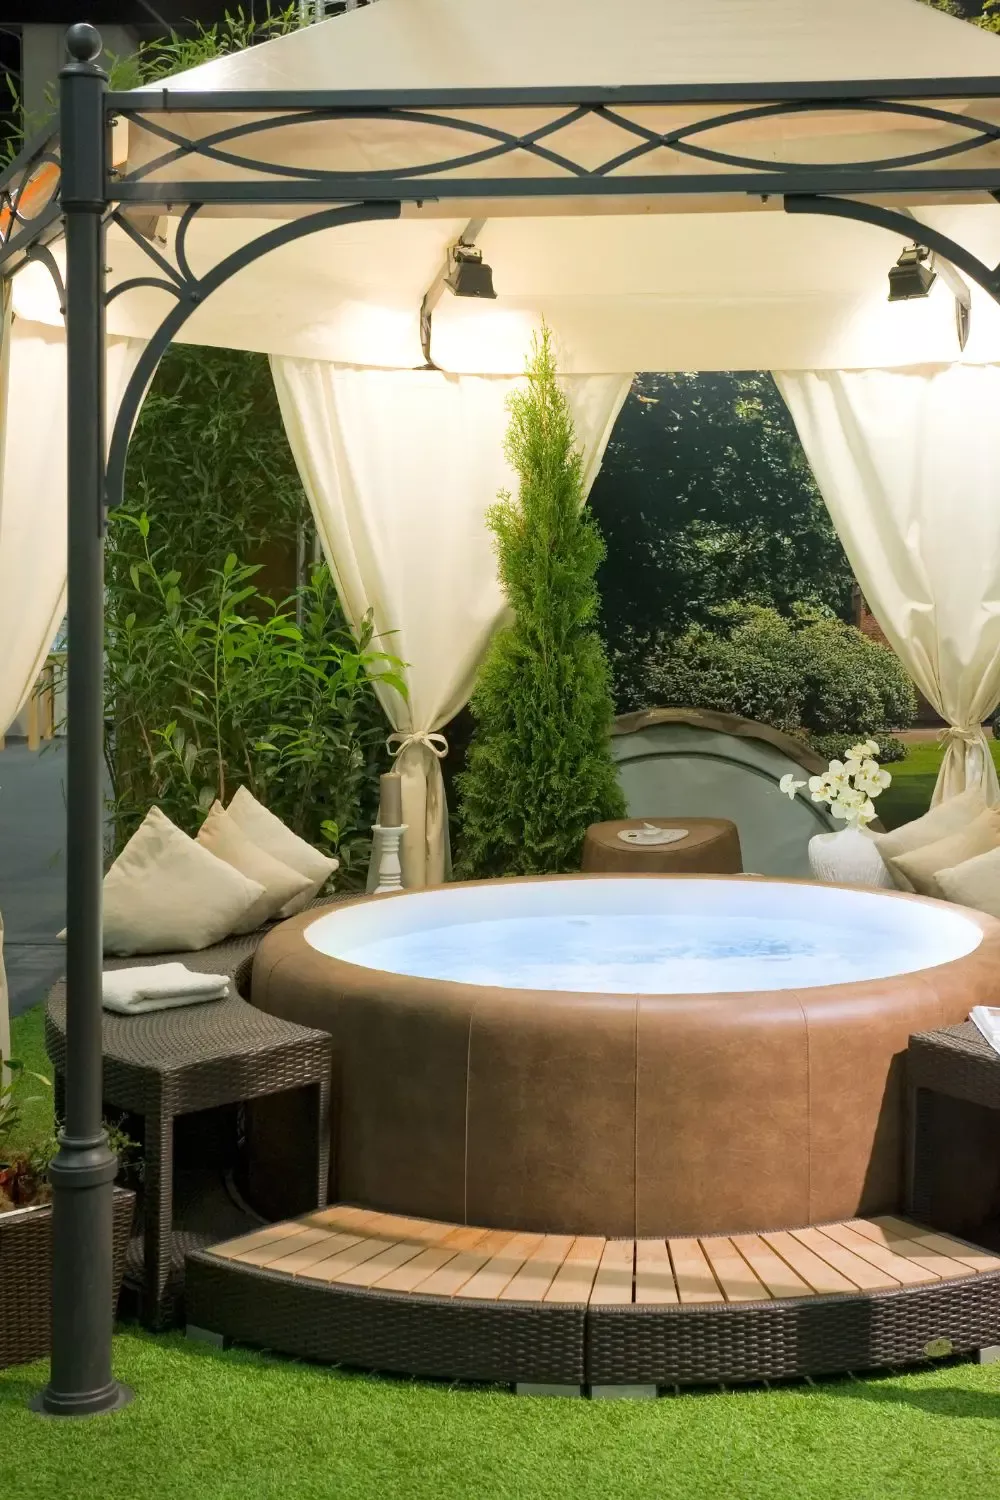 Transform Your Backyard with a Luxurious Hot Tub Oasis